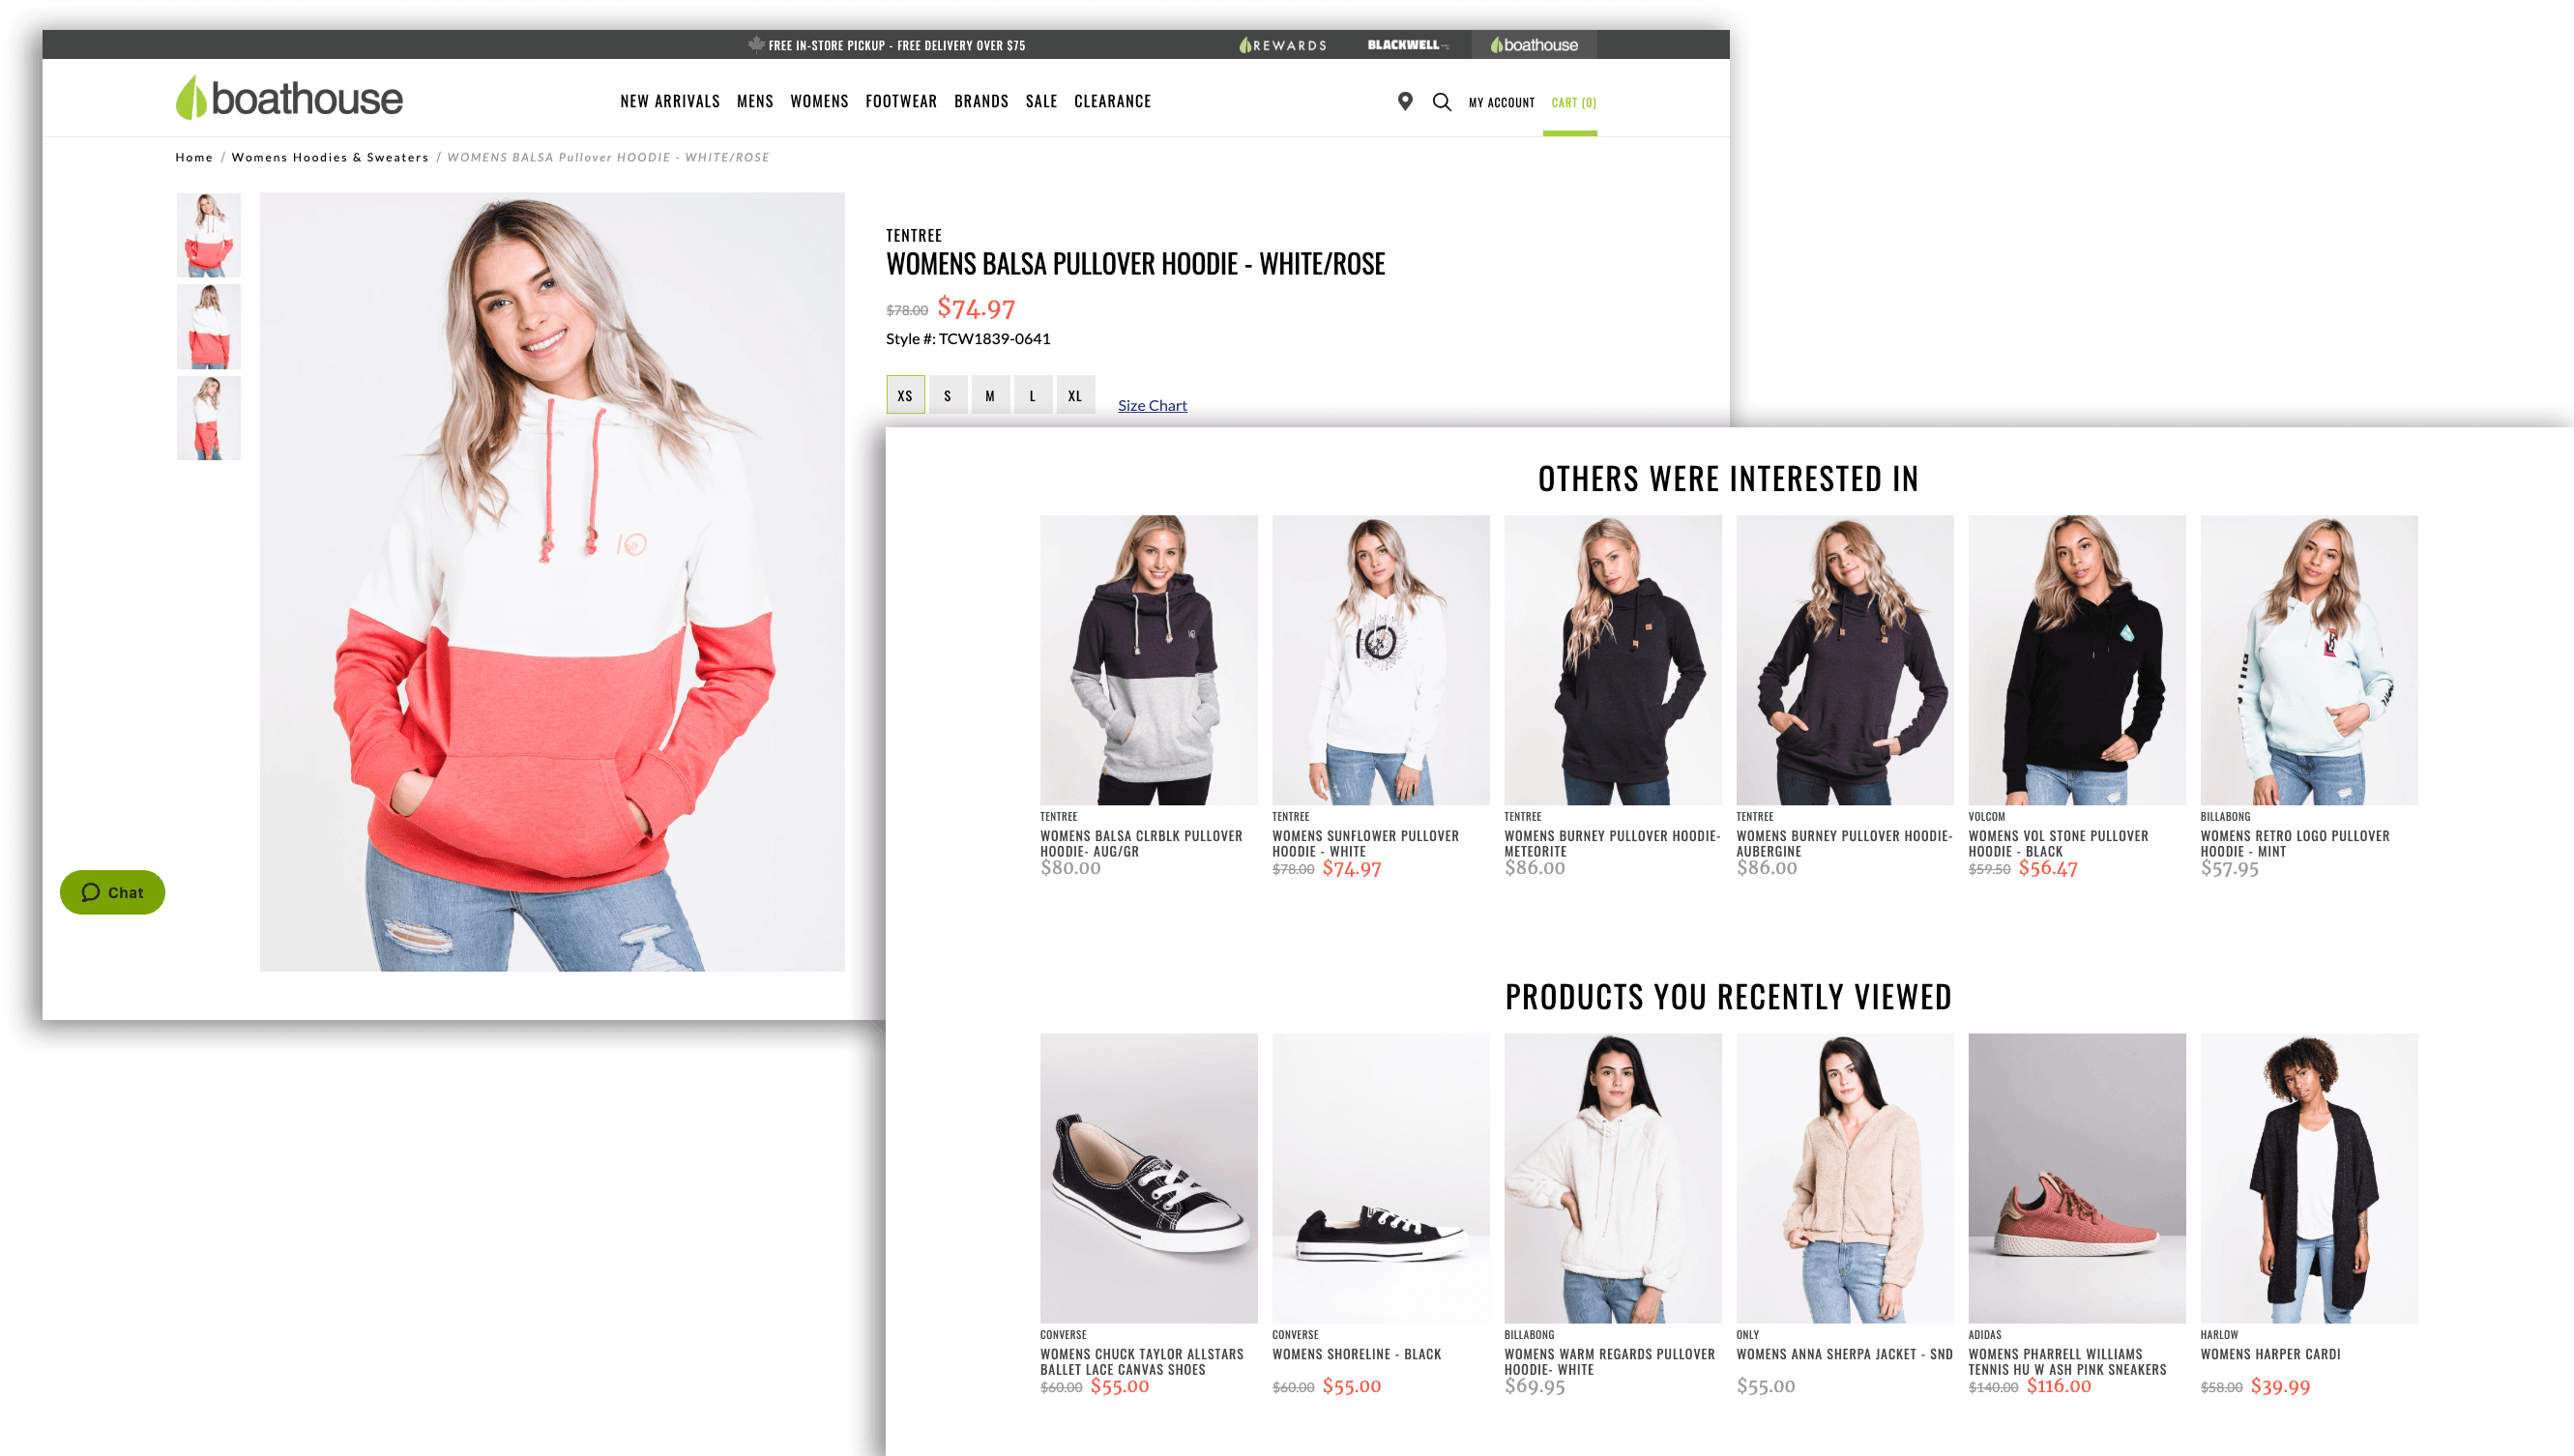 Ecommerce Personalization Tactics–Screenshots from the Boathouse website. The first shows the product page for a hoodie. The second shows the lower half of the page which displays 